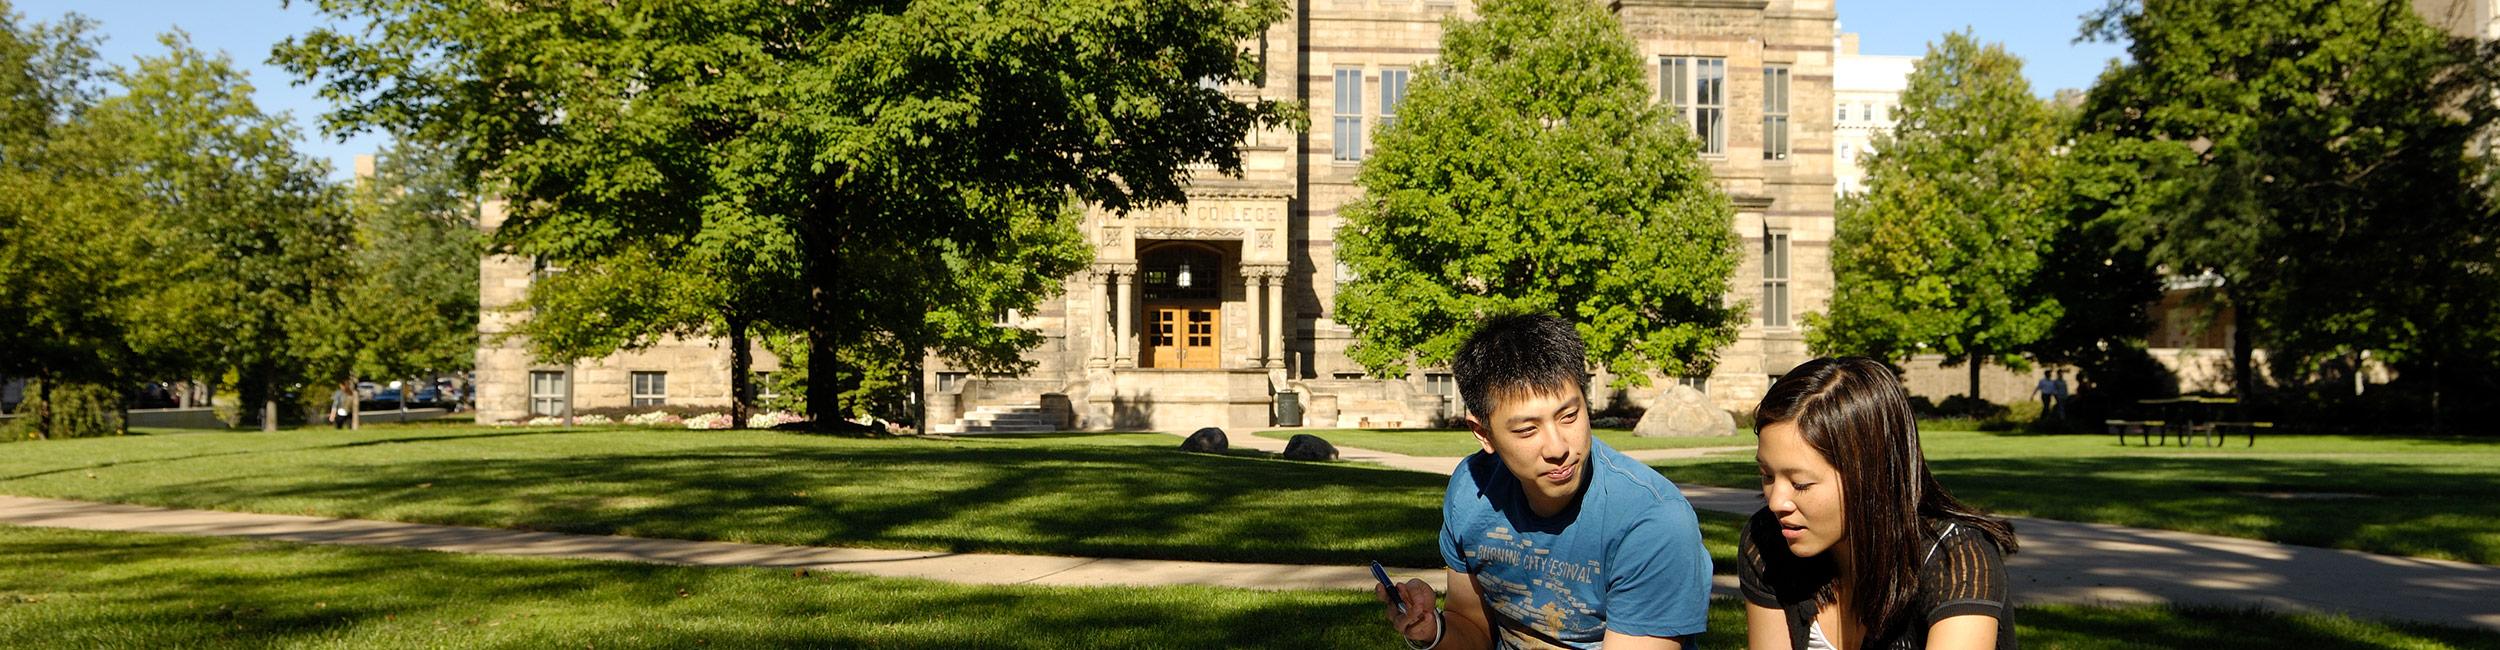 Students sitting on the grass in the quad